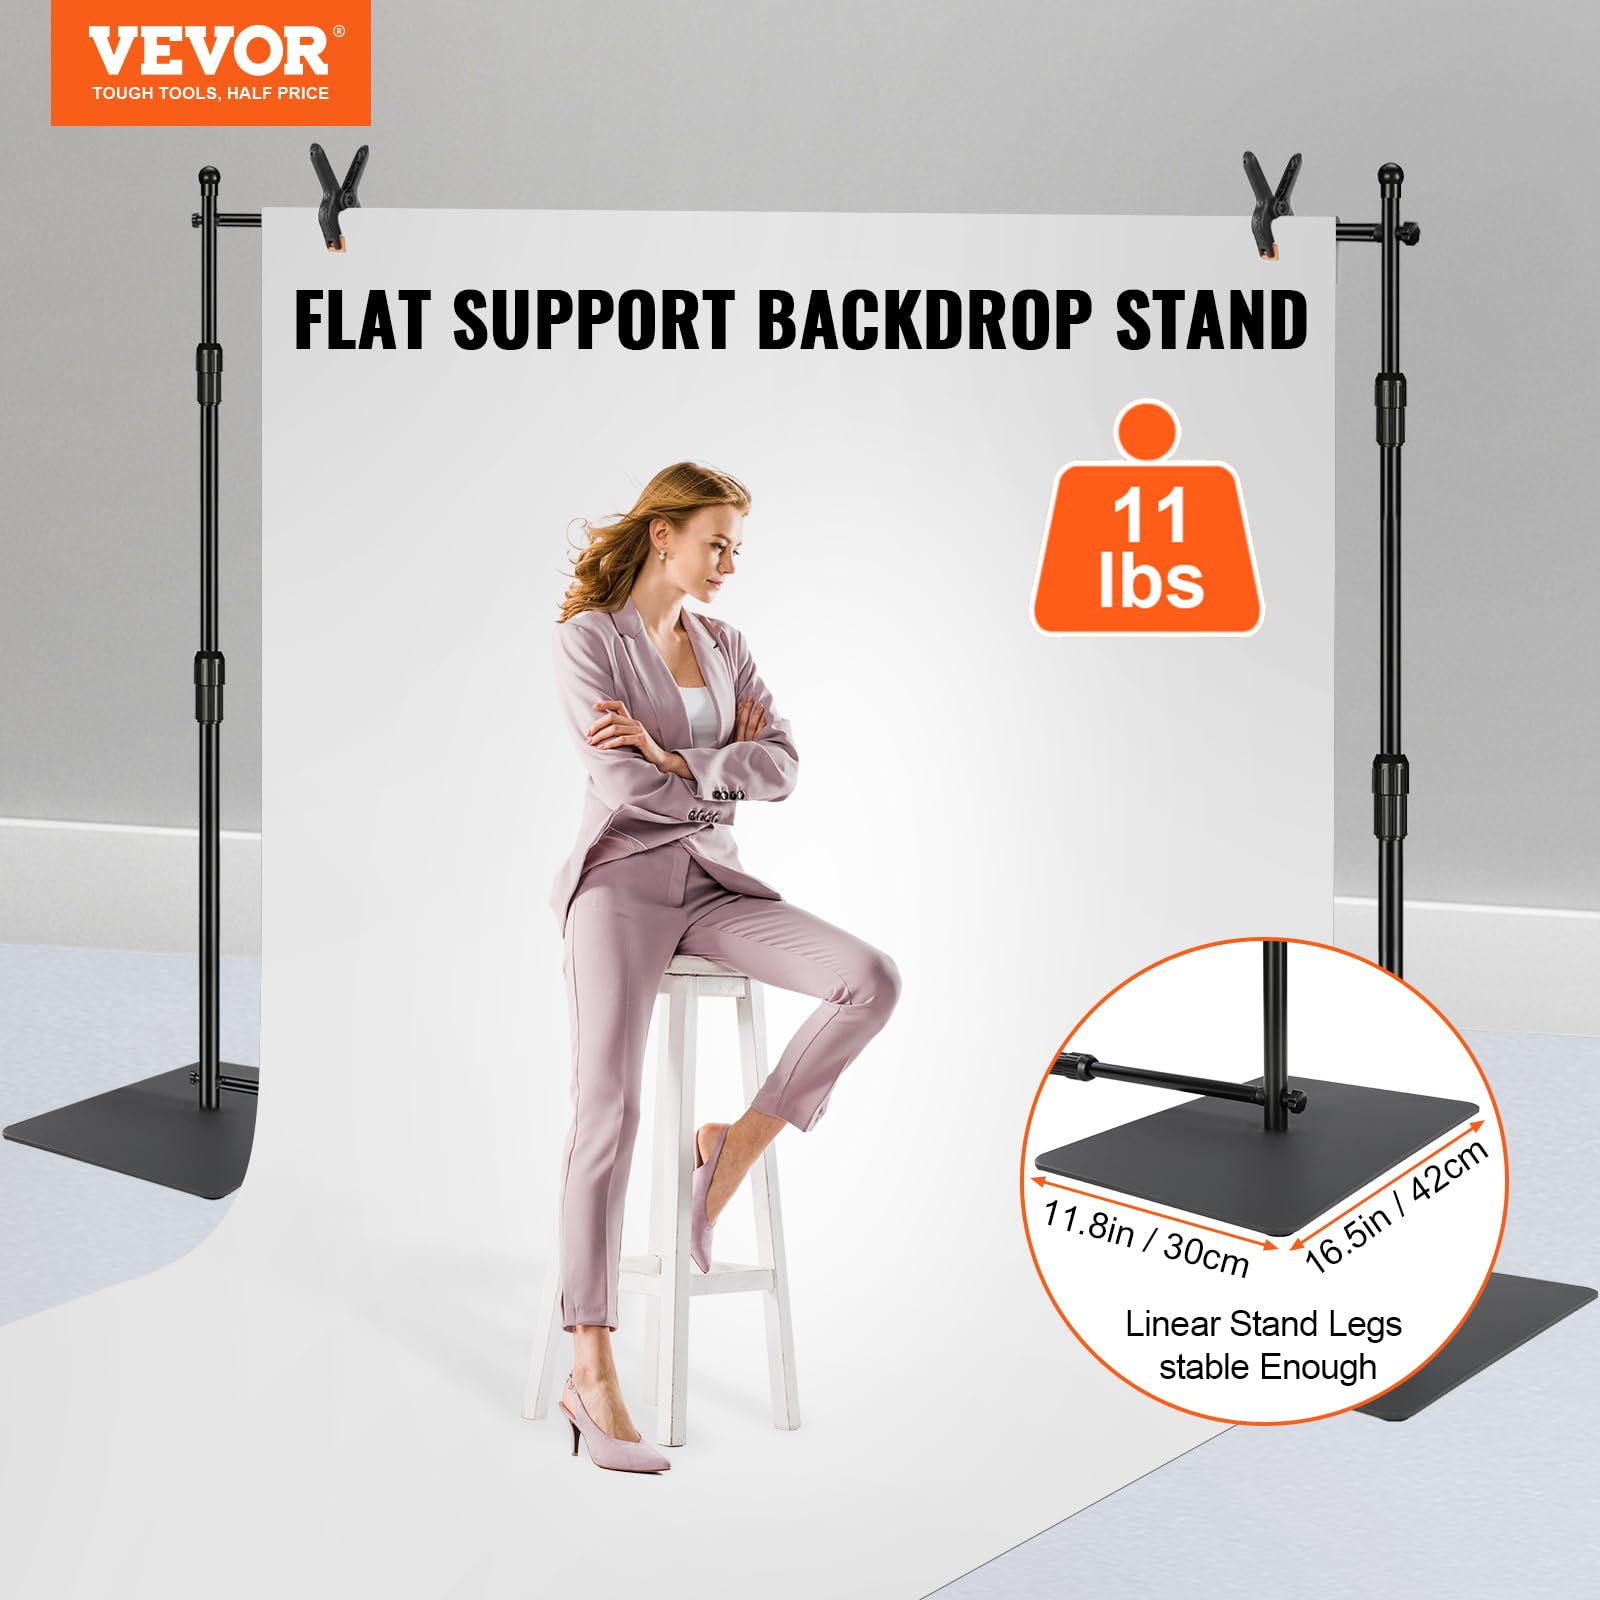 VEVOR 10ft x10ft Pipe and Drape Kit, Heavy Duty Backdrop Stand with Carbon Steel Base, Adjustable Backdrop Support with 2 Clamps and A Carry Bag for Wedding, Party, Event, Photography and Exhibition